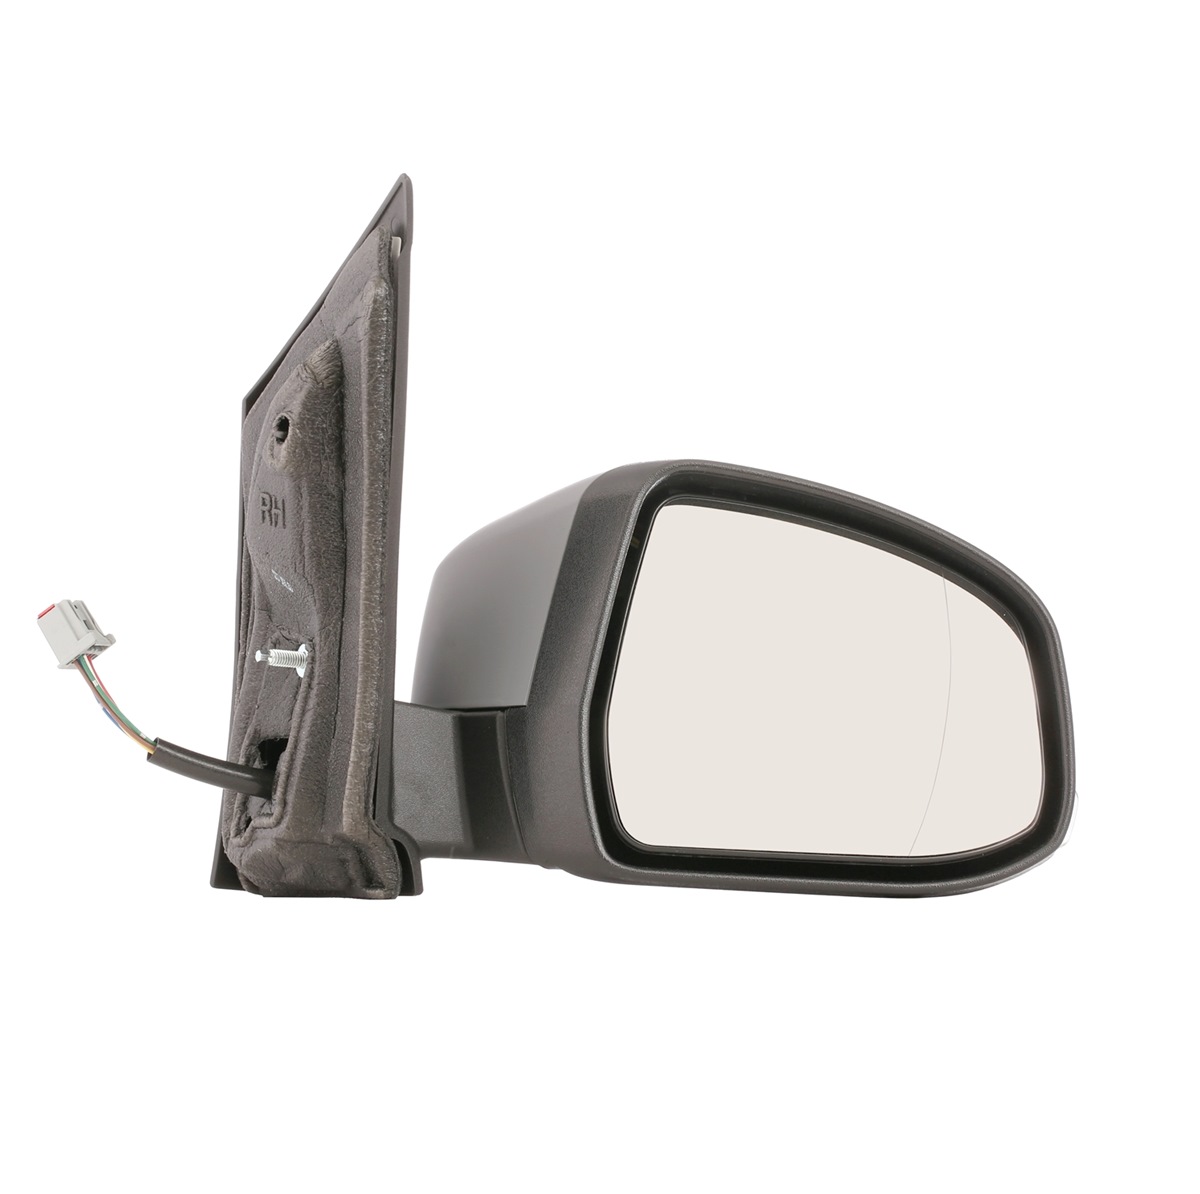 STARK SKOM-1040384 Wing mirror Right, primed, Complete Mirror, Aspherical, for electric mirror adjustment, Heatable